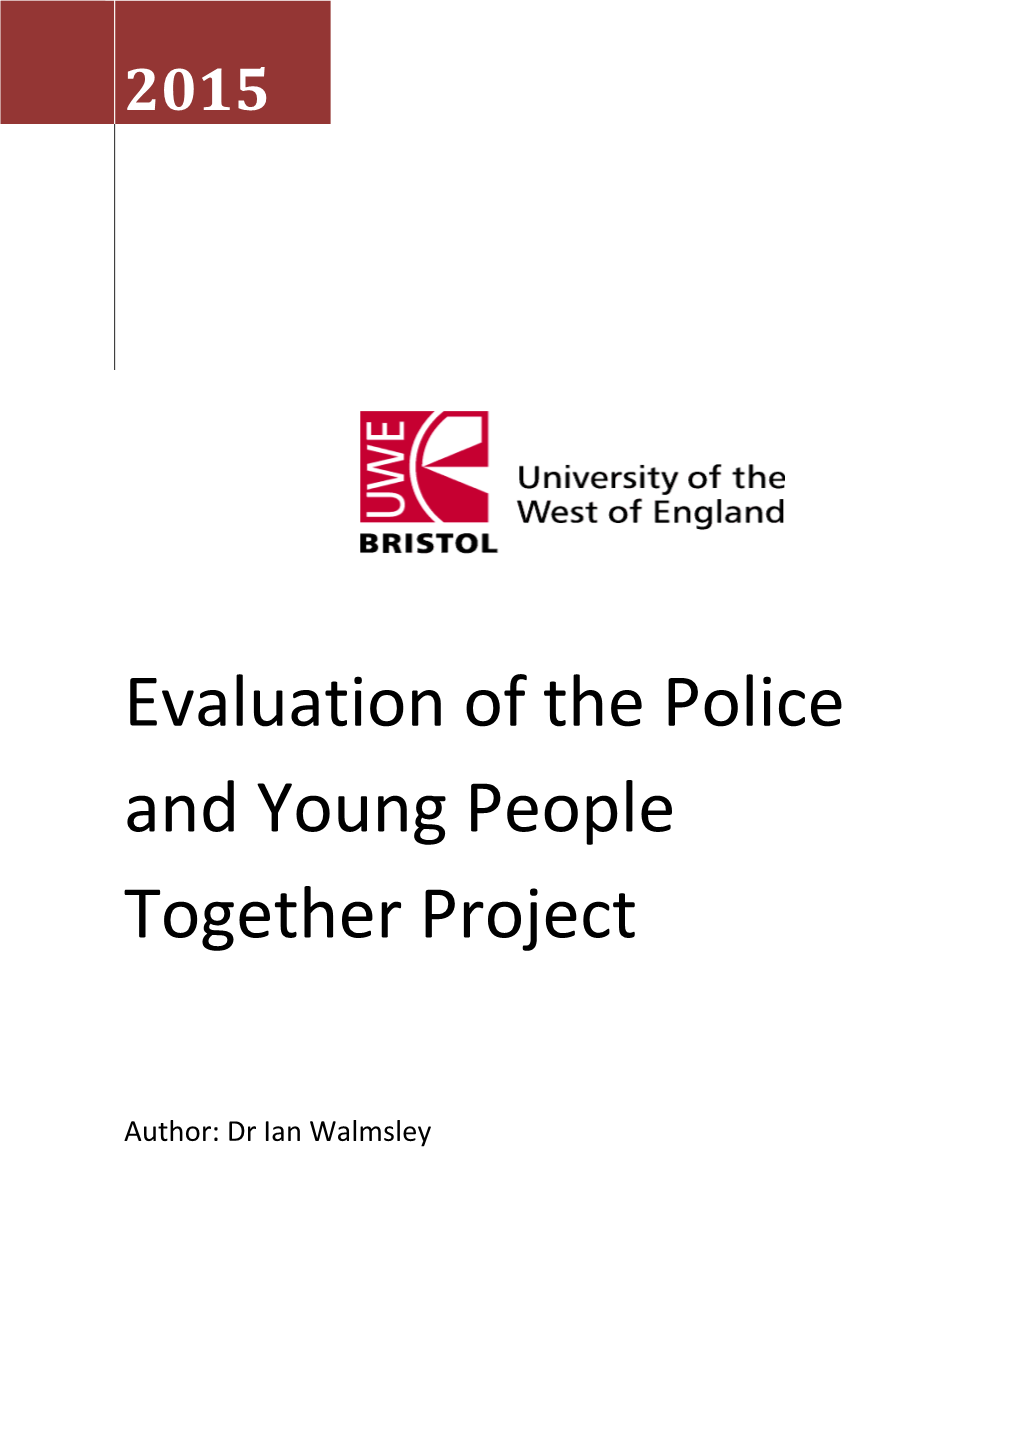 Evaluation of the Police and Young People Together Project